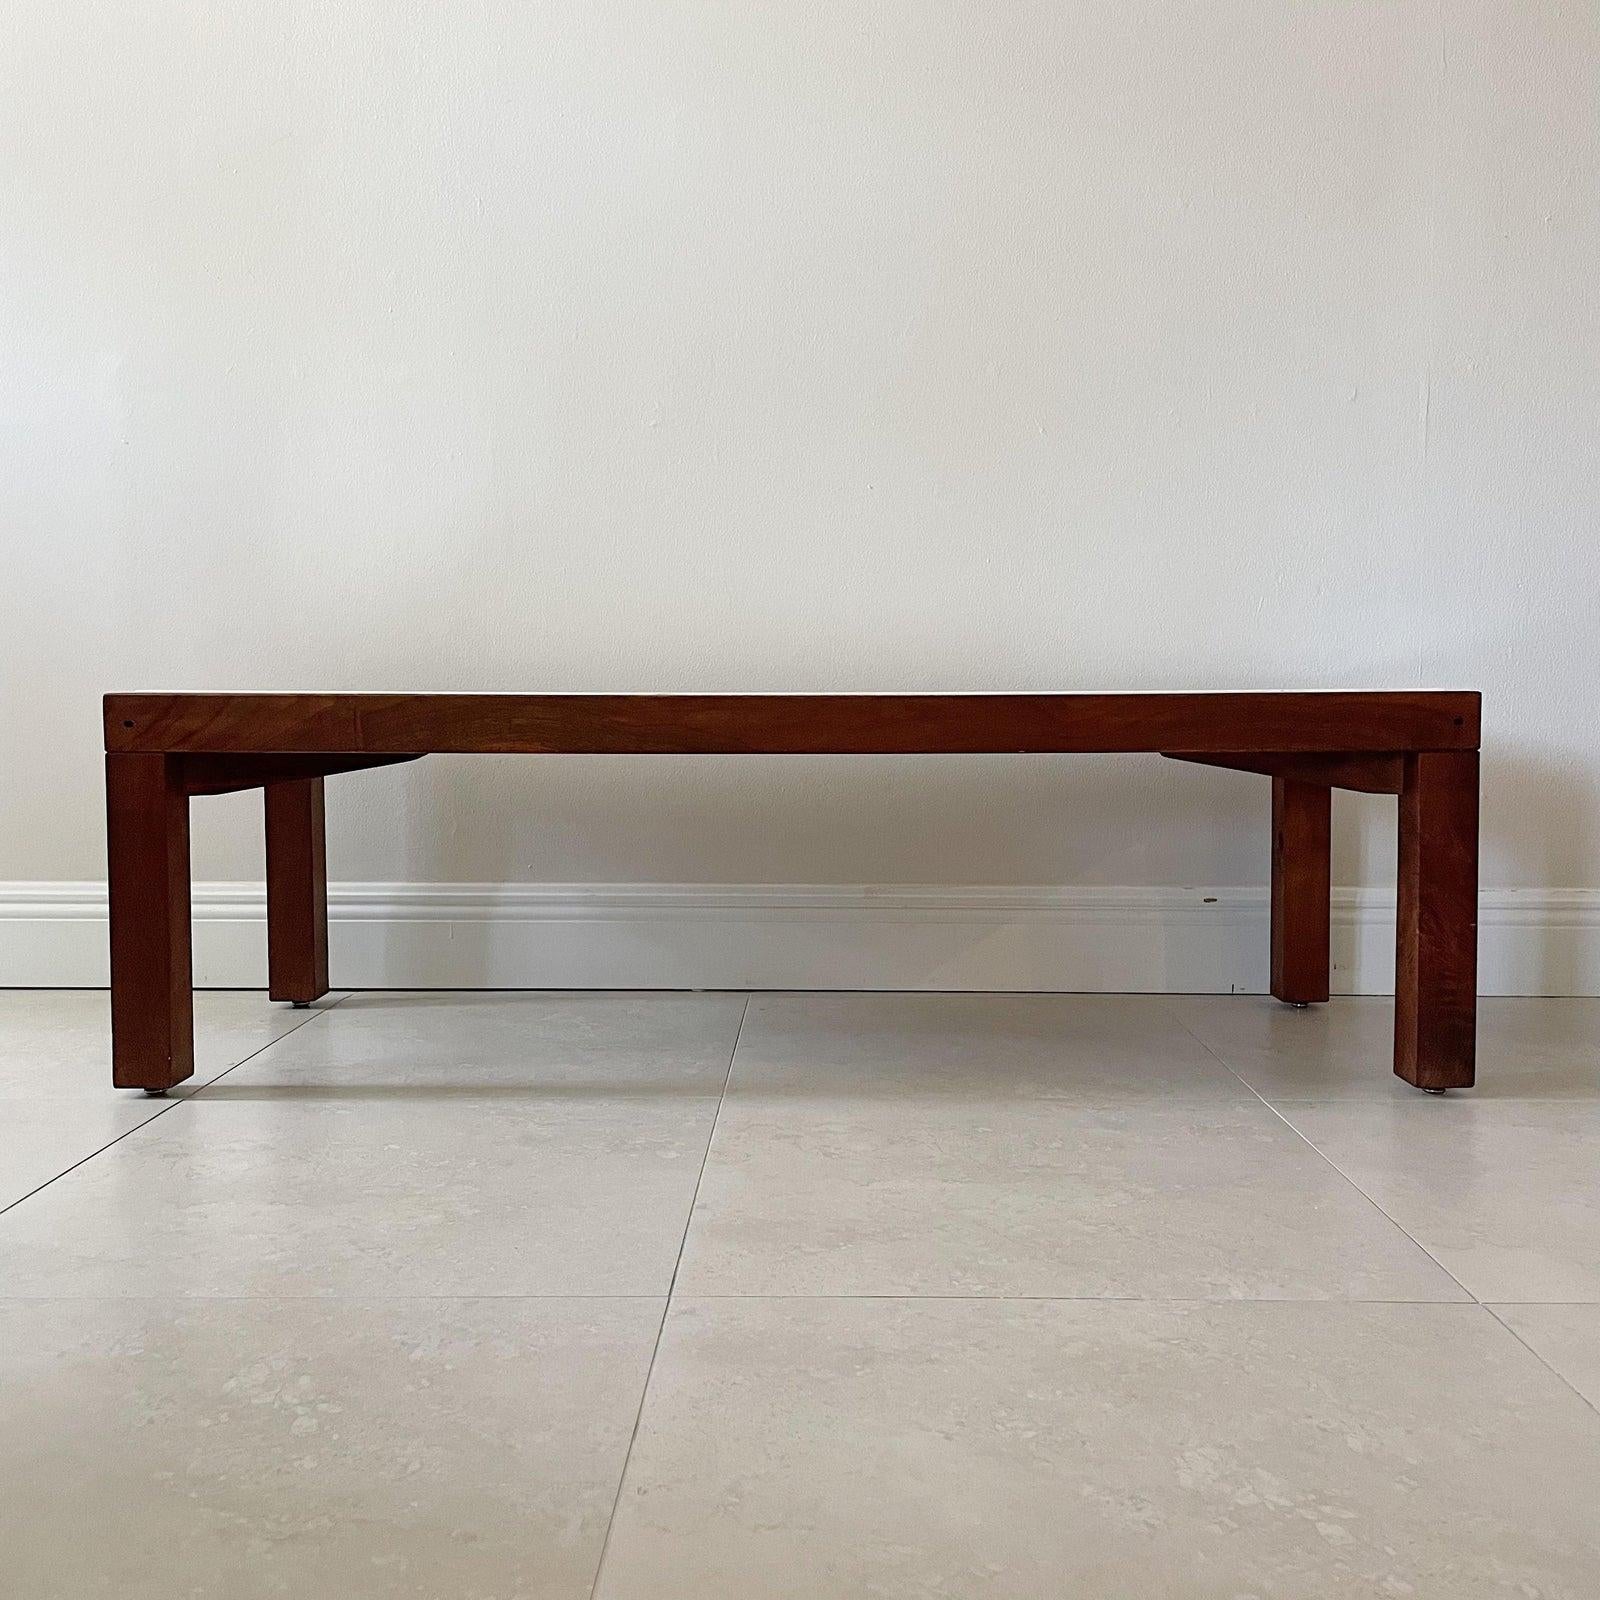 Mid-century wood with white inset marble with white veins, coffee, cocktail table. This simple yet classic parson style design wood table shows some expected age appropriate wear. Unsigned.